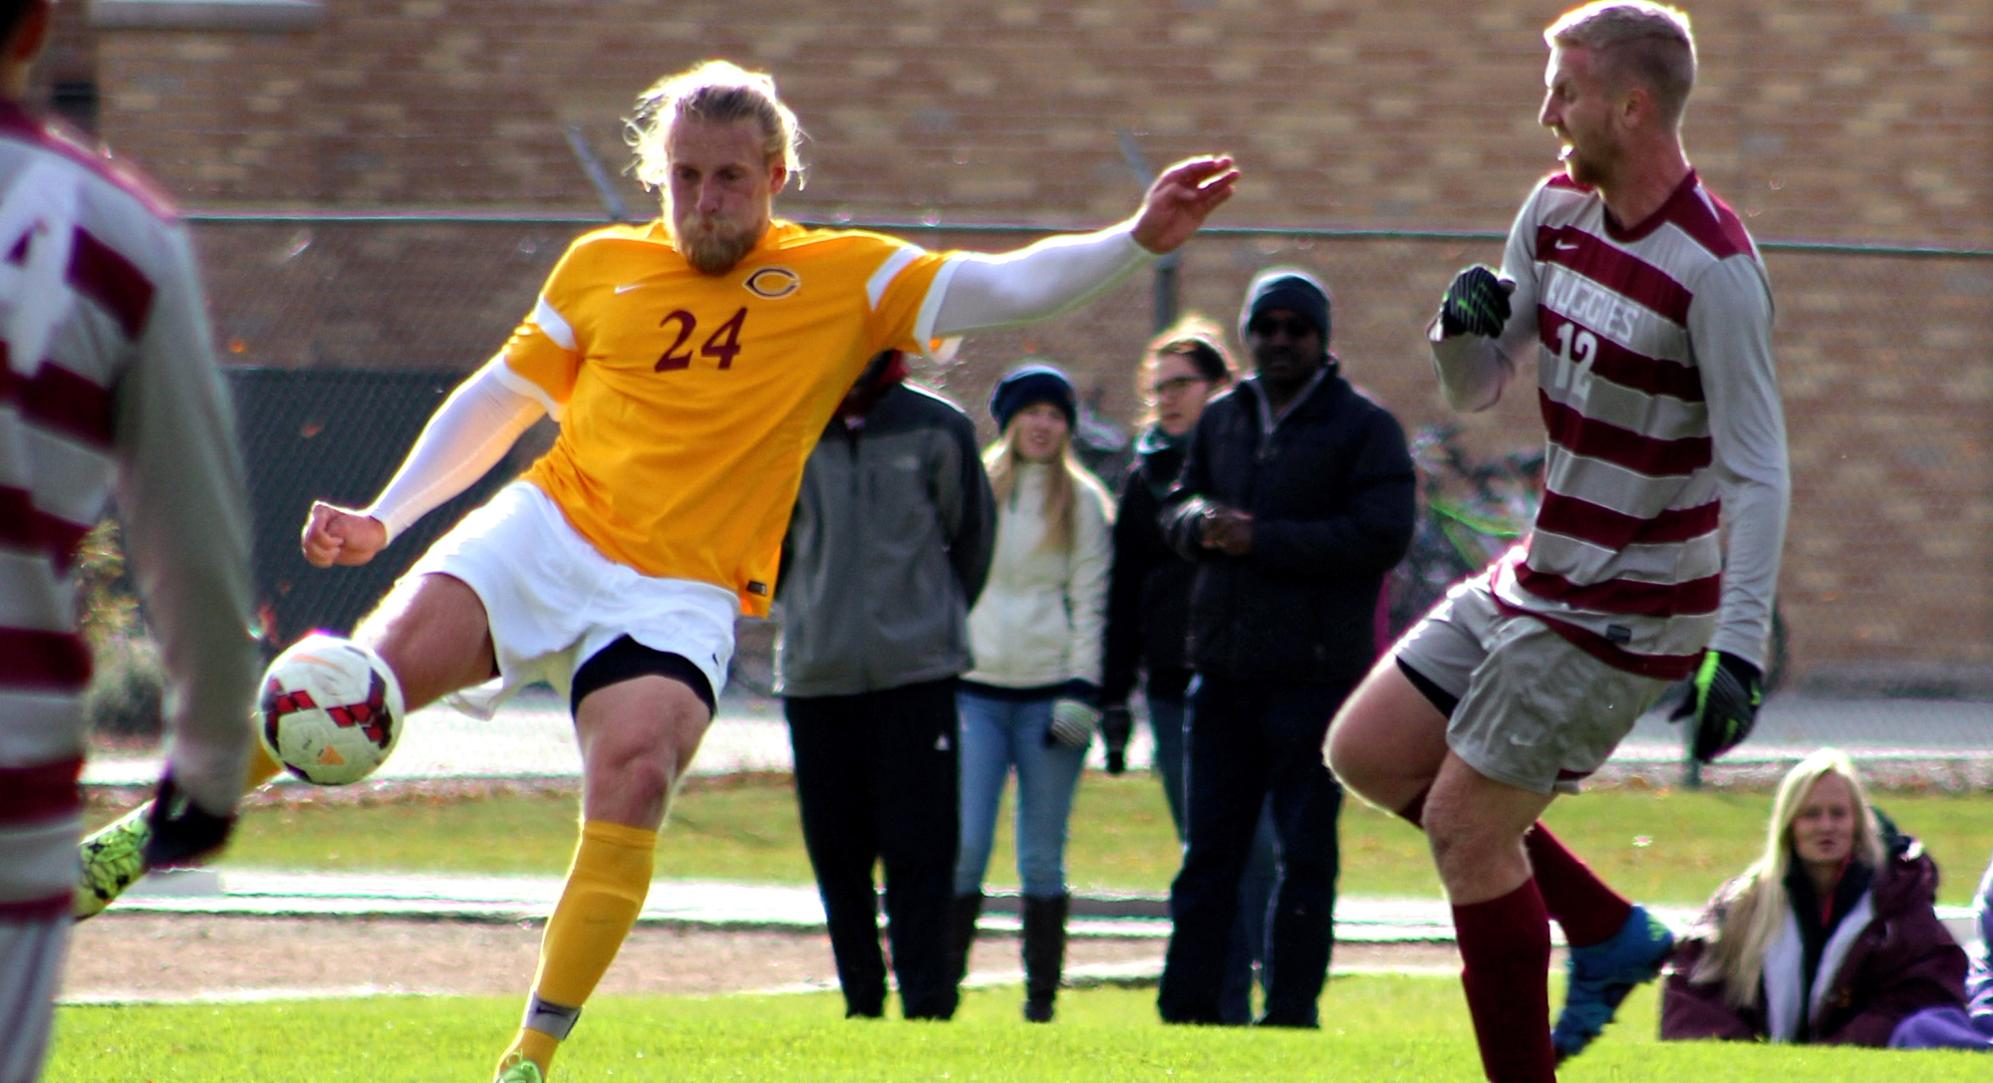 Sophomore Austin Peterson connects on a clearance volley during the Cobbers' game with Augsburg. Peterson scored his first collegiate goal in the second half.